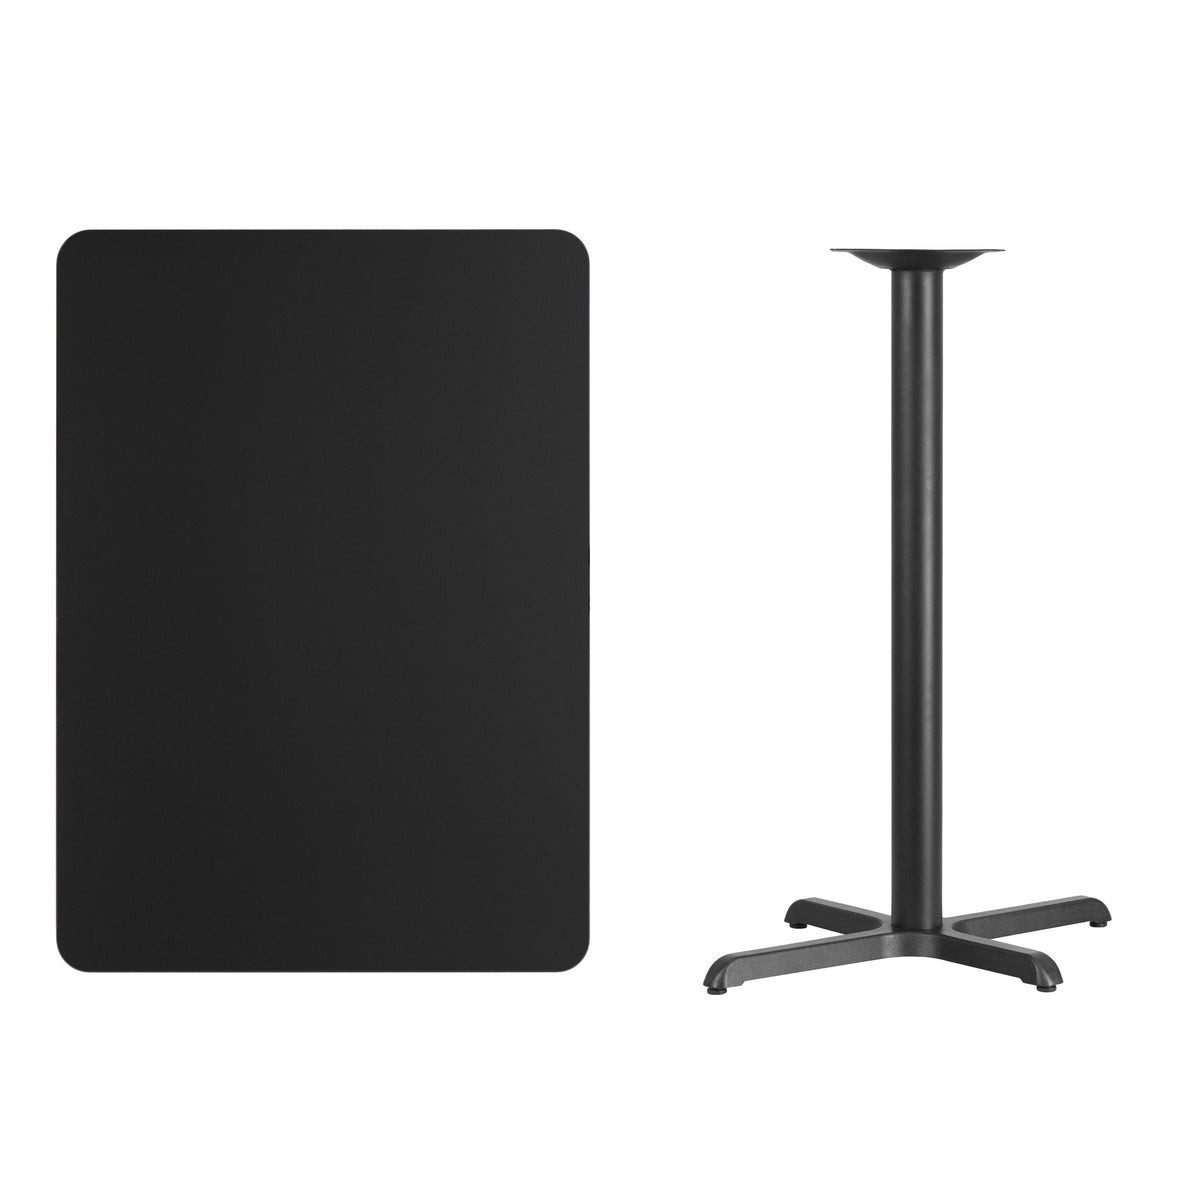 Black |#| 30inch x 42inch Rectangular Laminate Table Top & 23.5inch x 29.5inch Bar Height Table Base